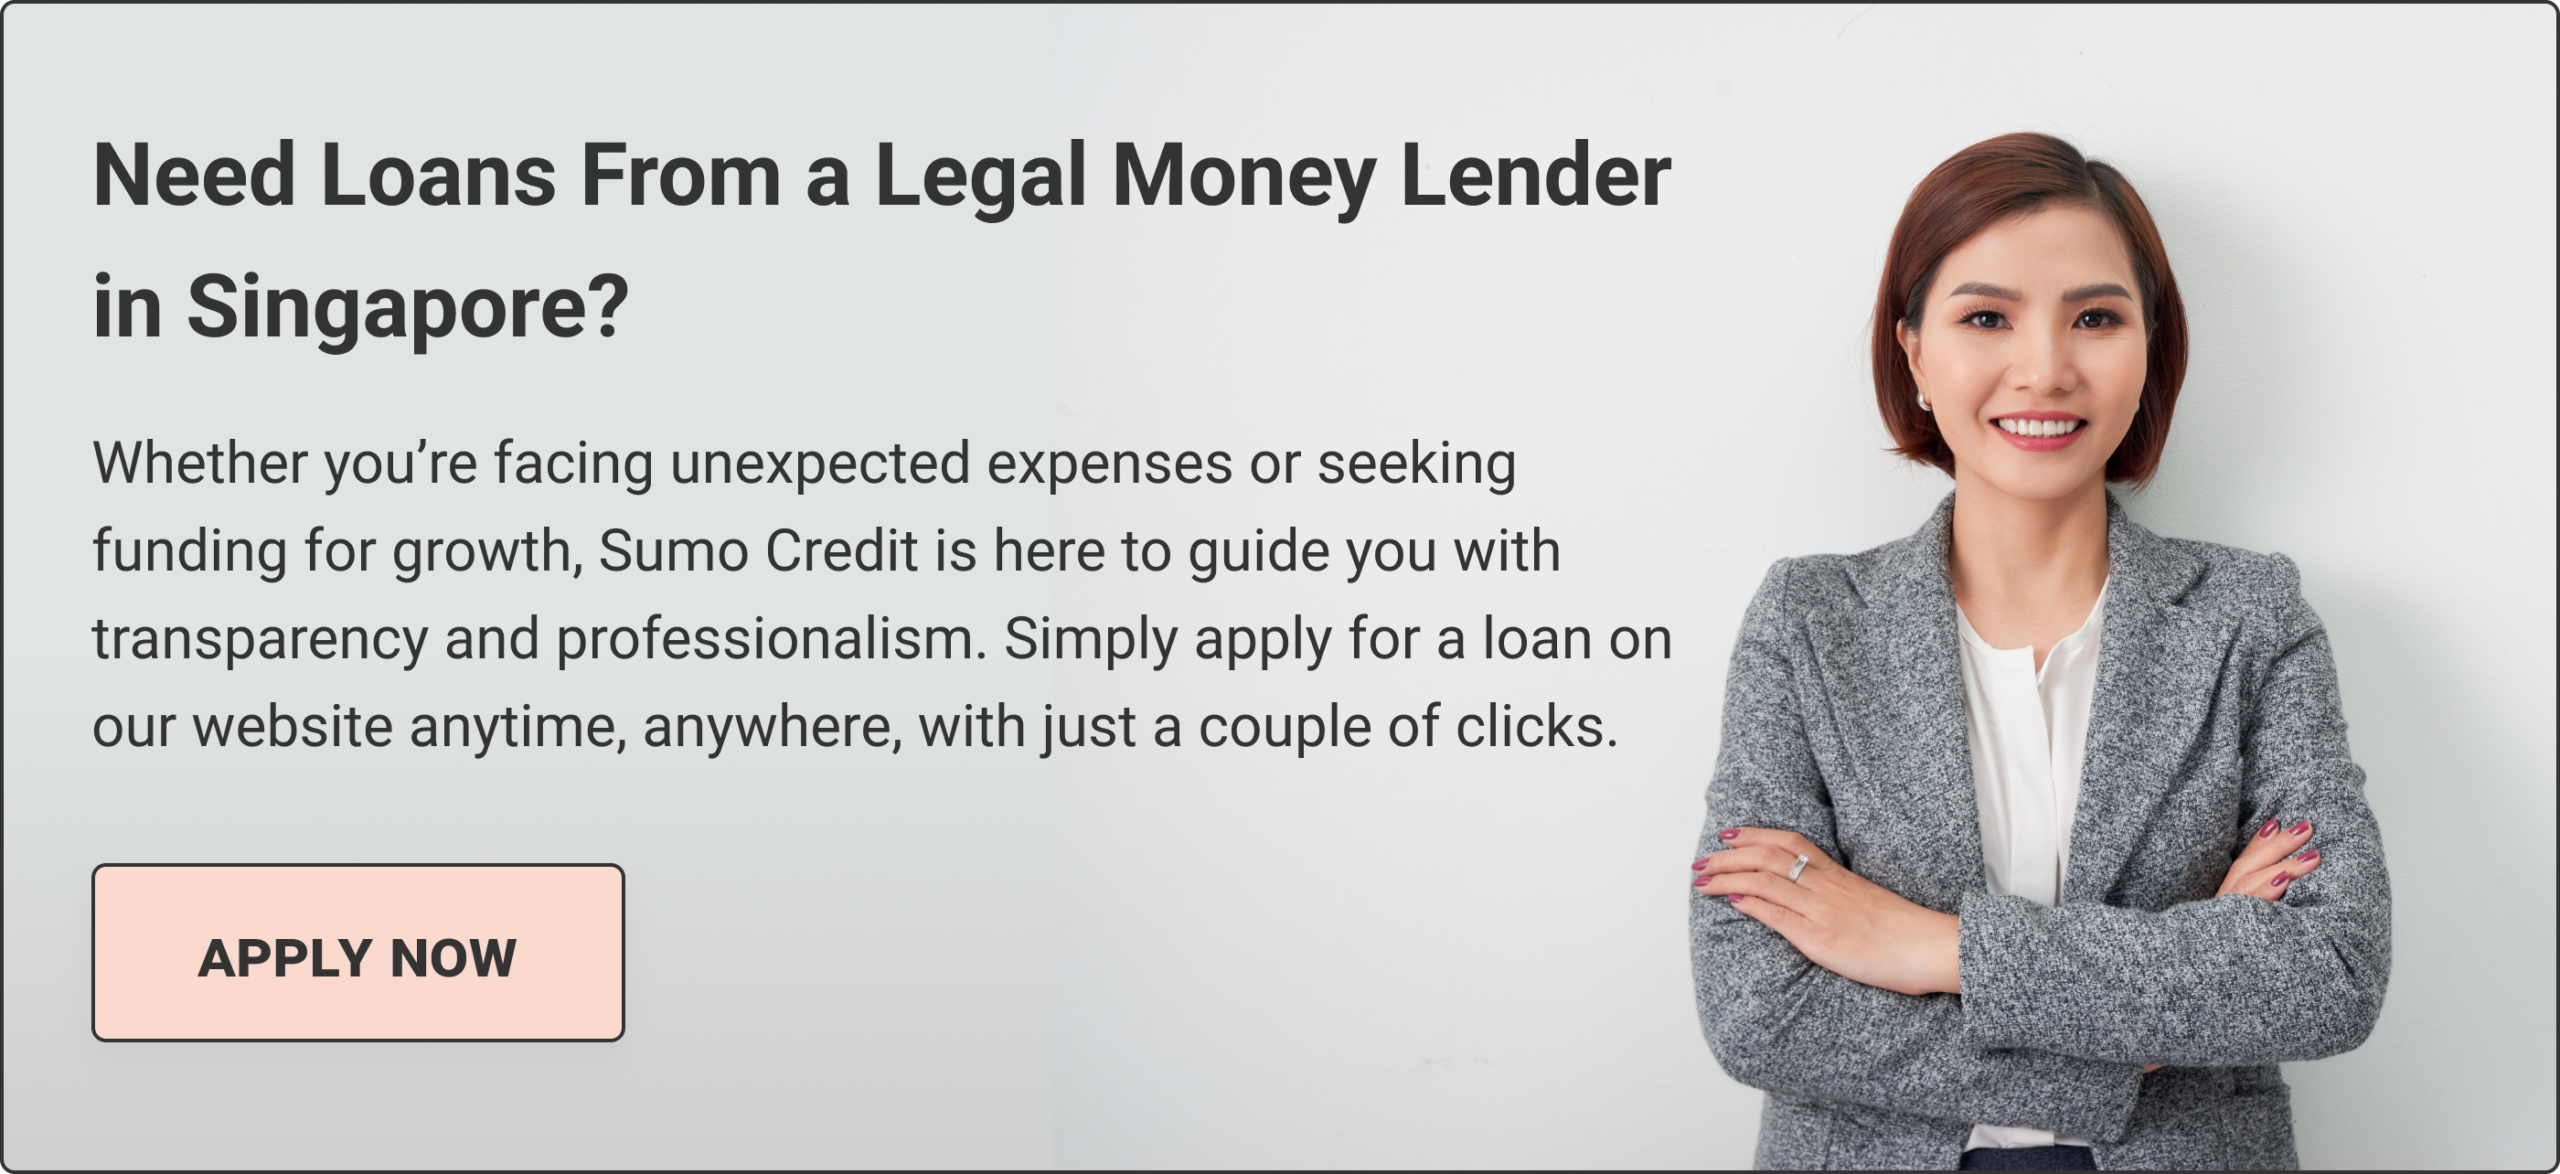 Need Loans From a Legal Money Lender in Singapore